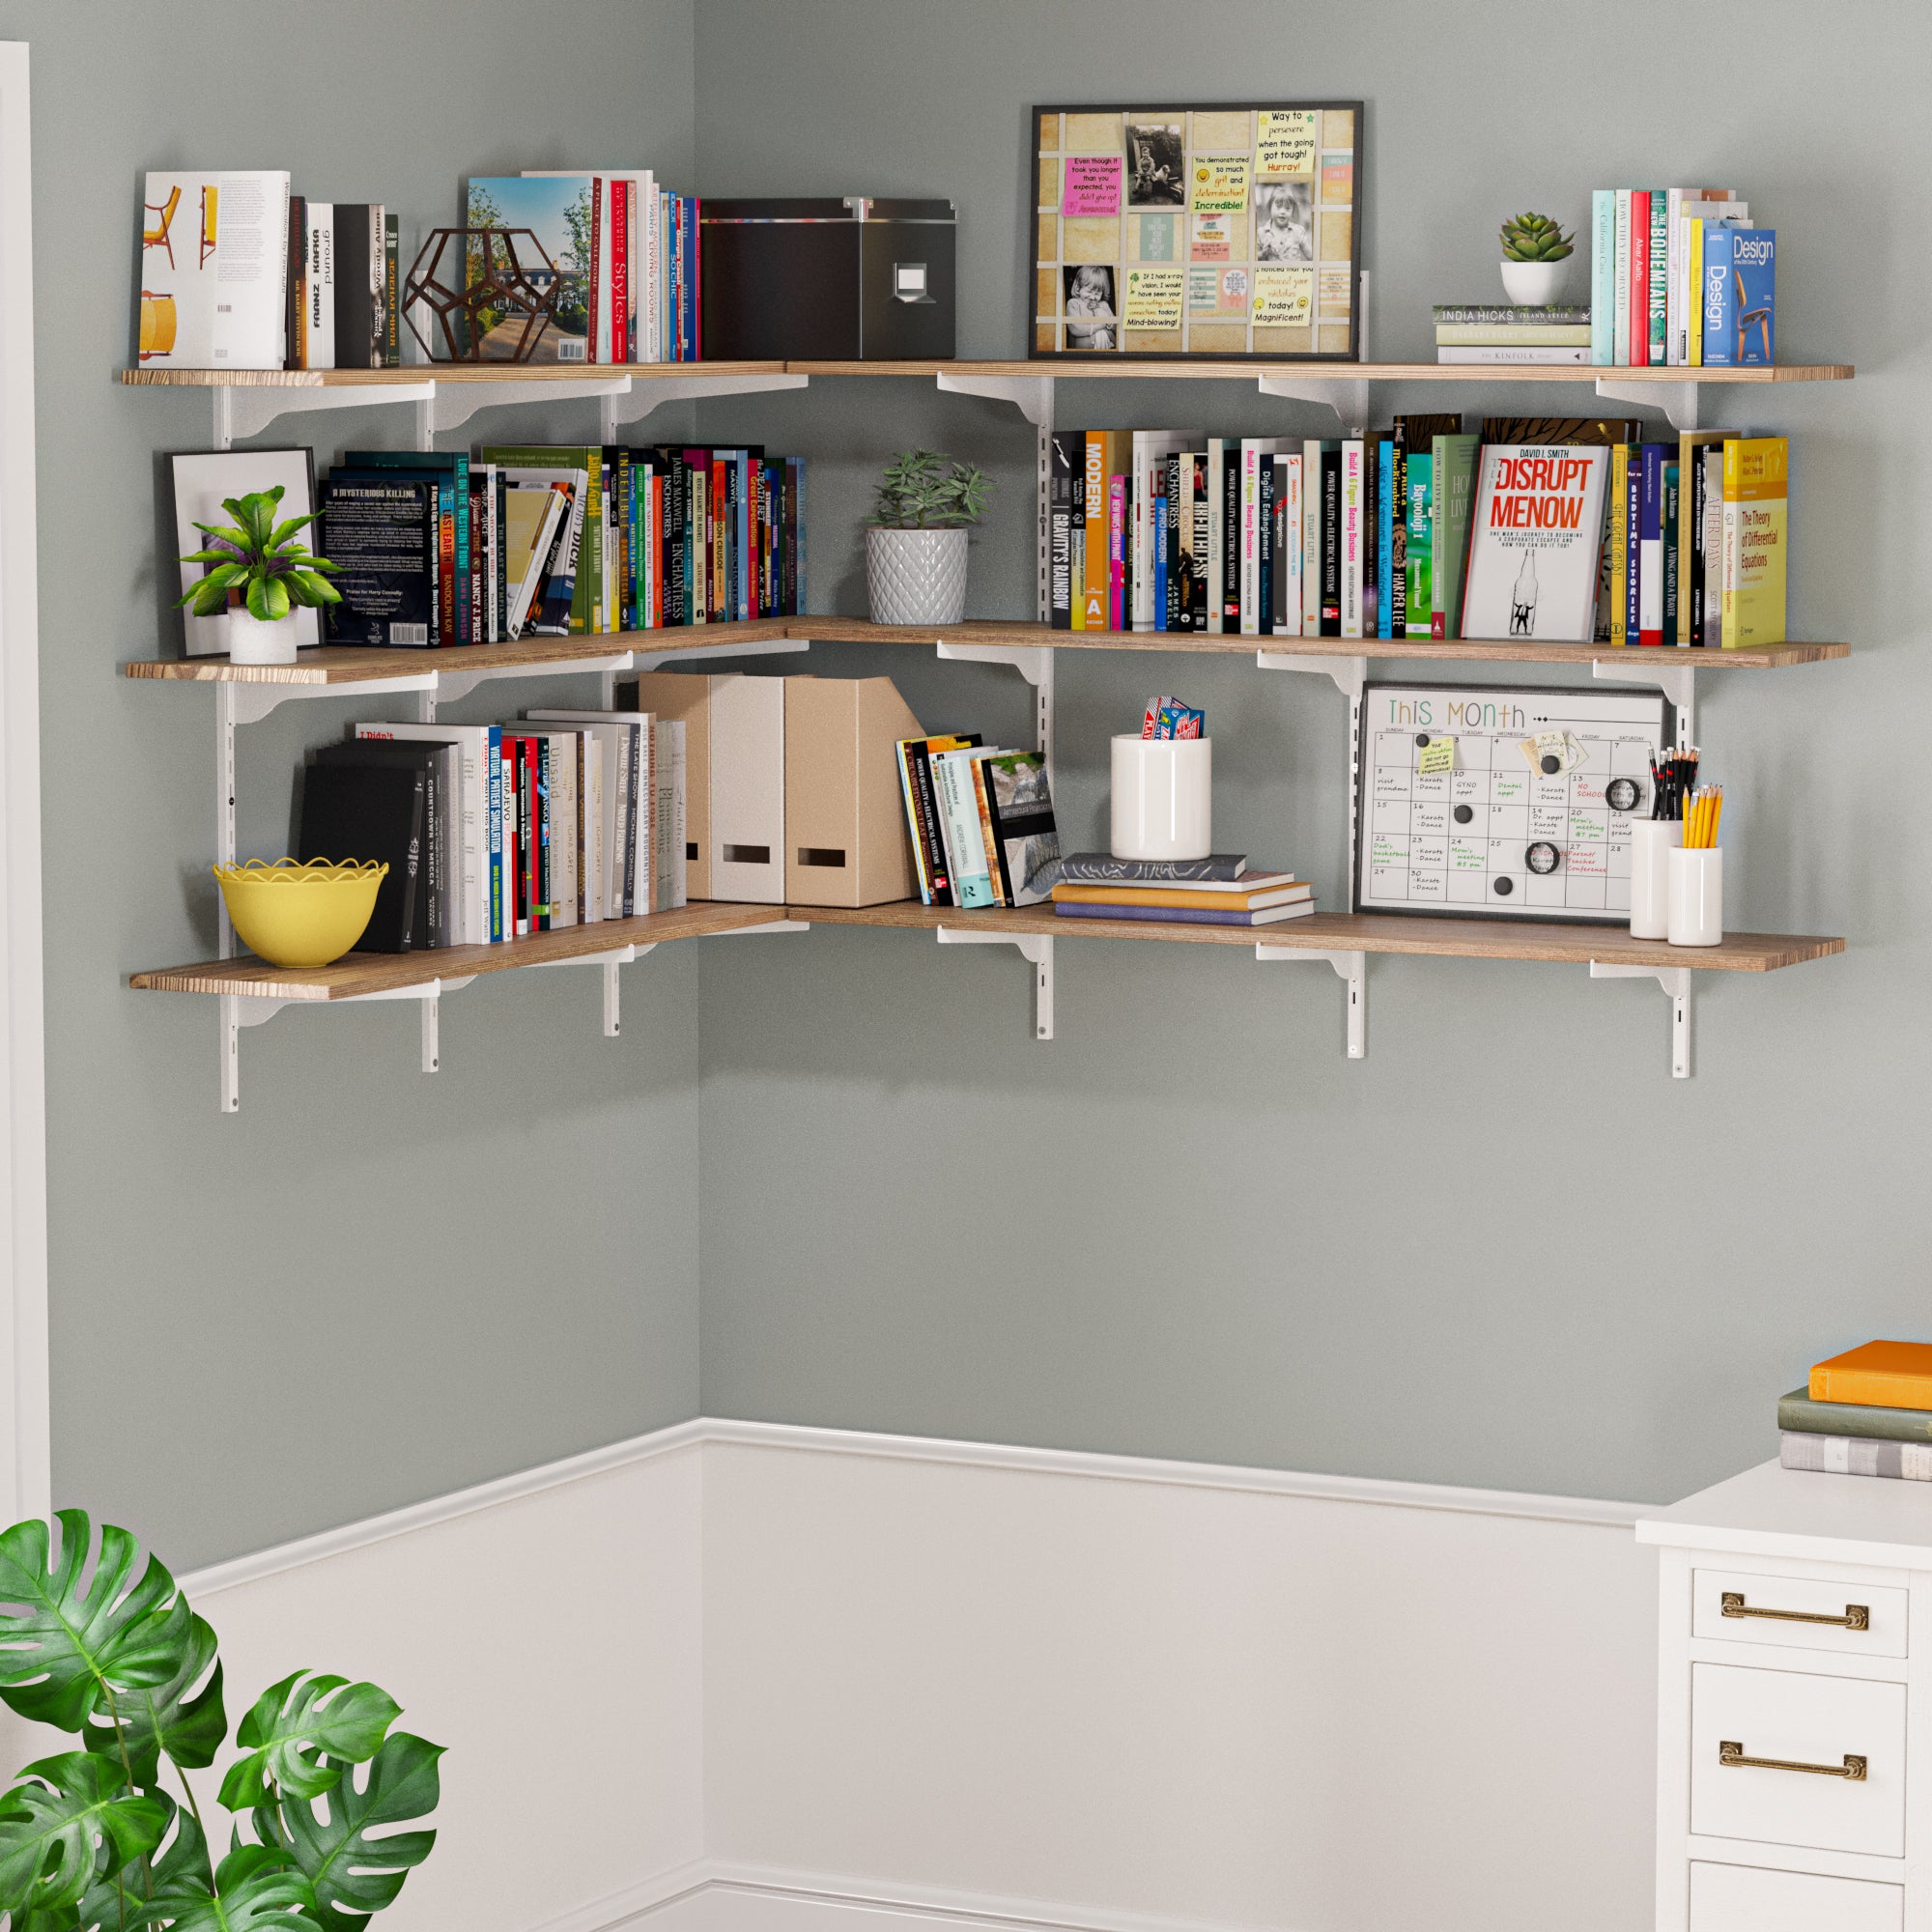 A corner office space with corner shelf wall mount full of books, plants, and an organized workstation.